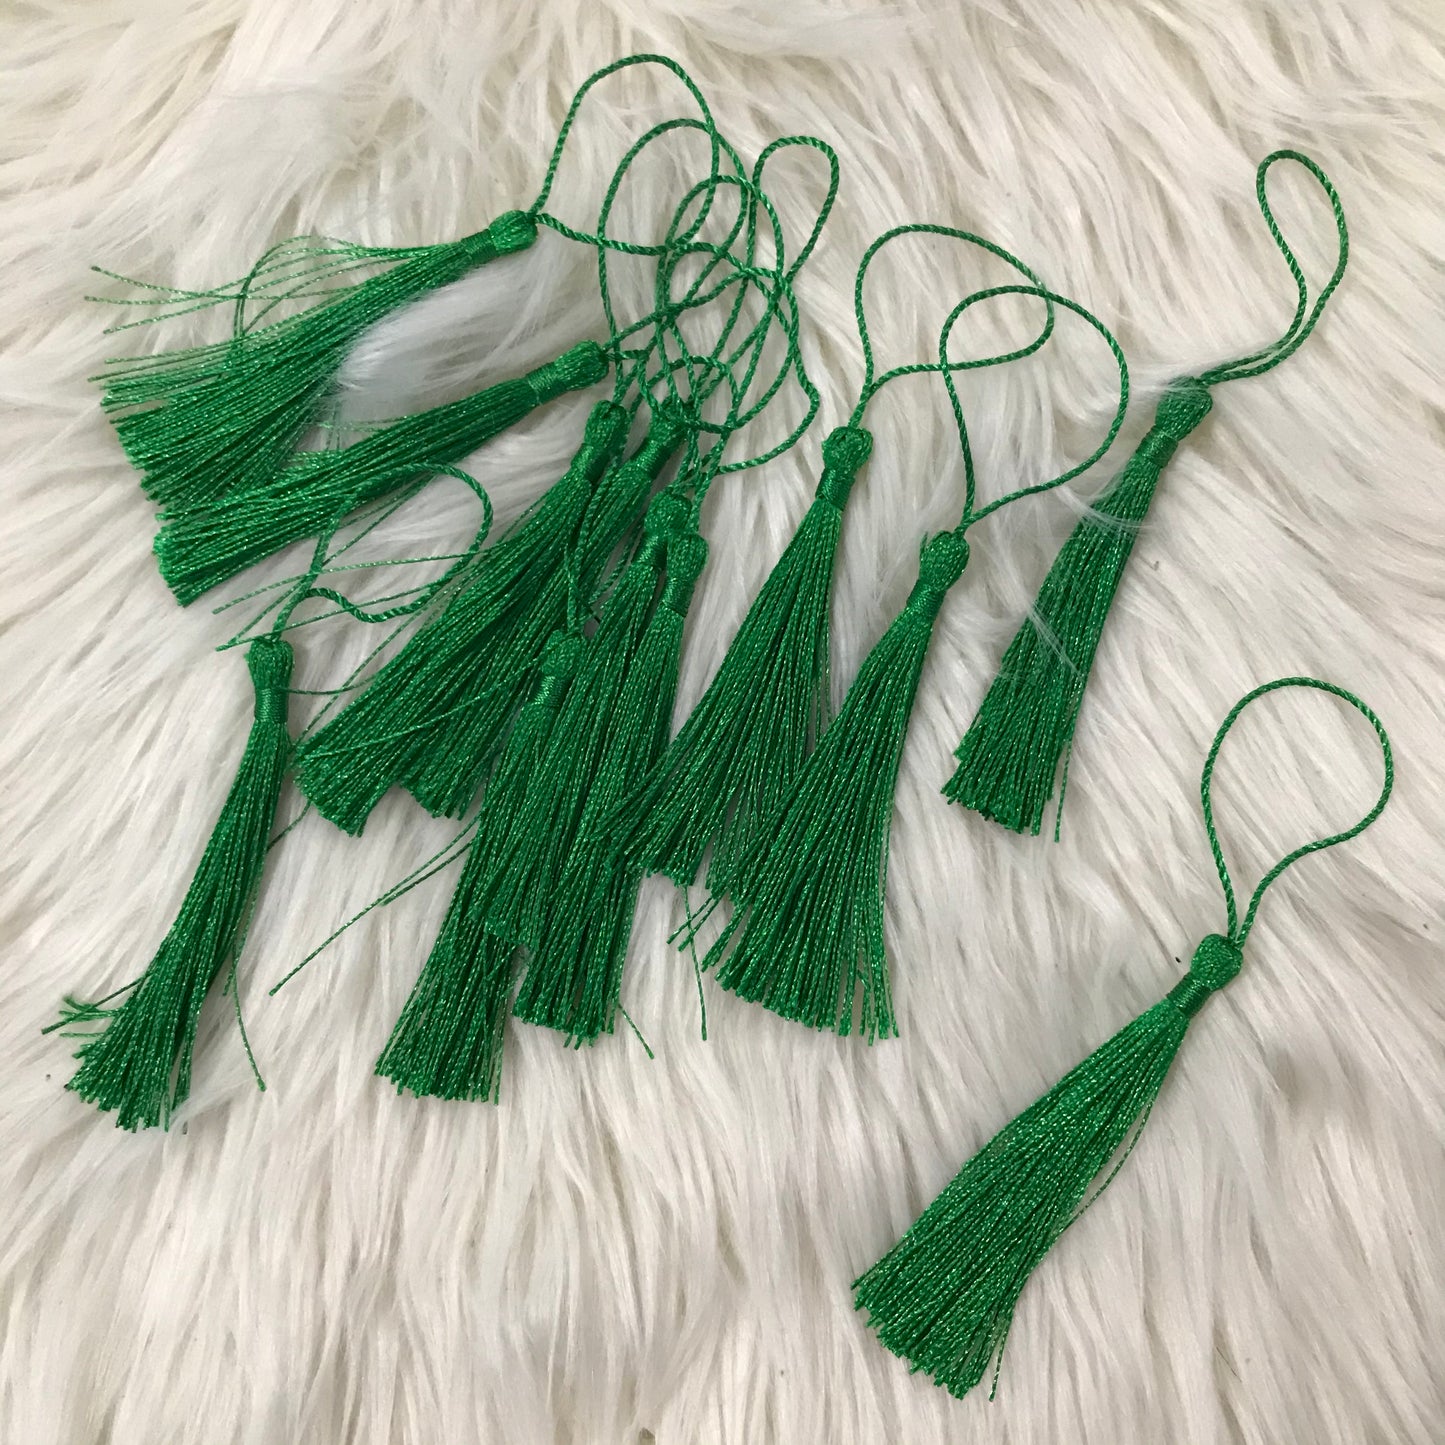 Green Embroidery Floss Tassel - Retail Notions